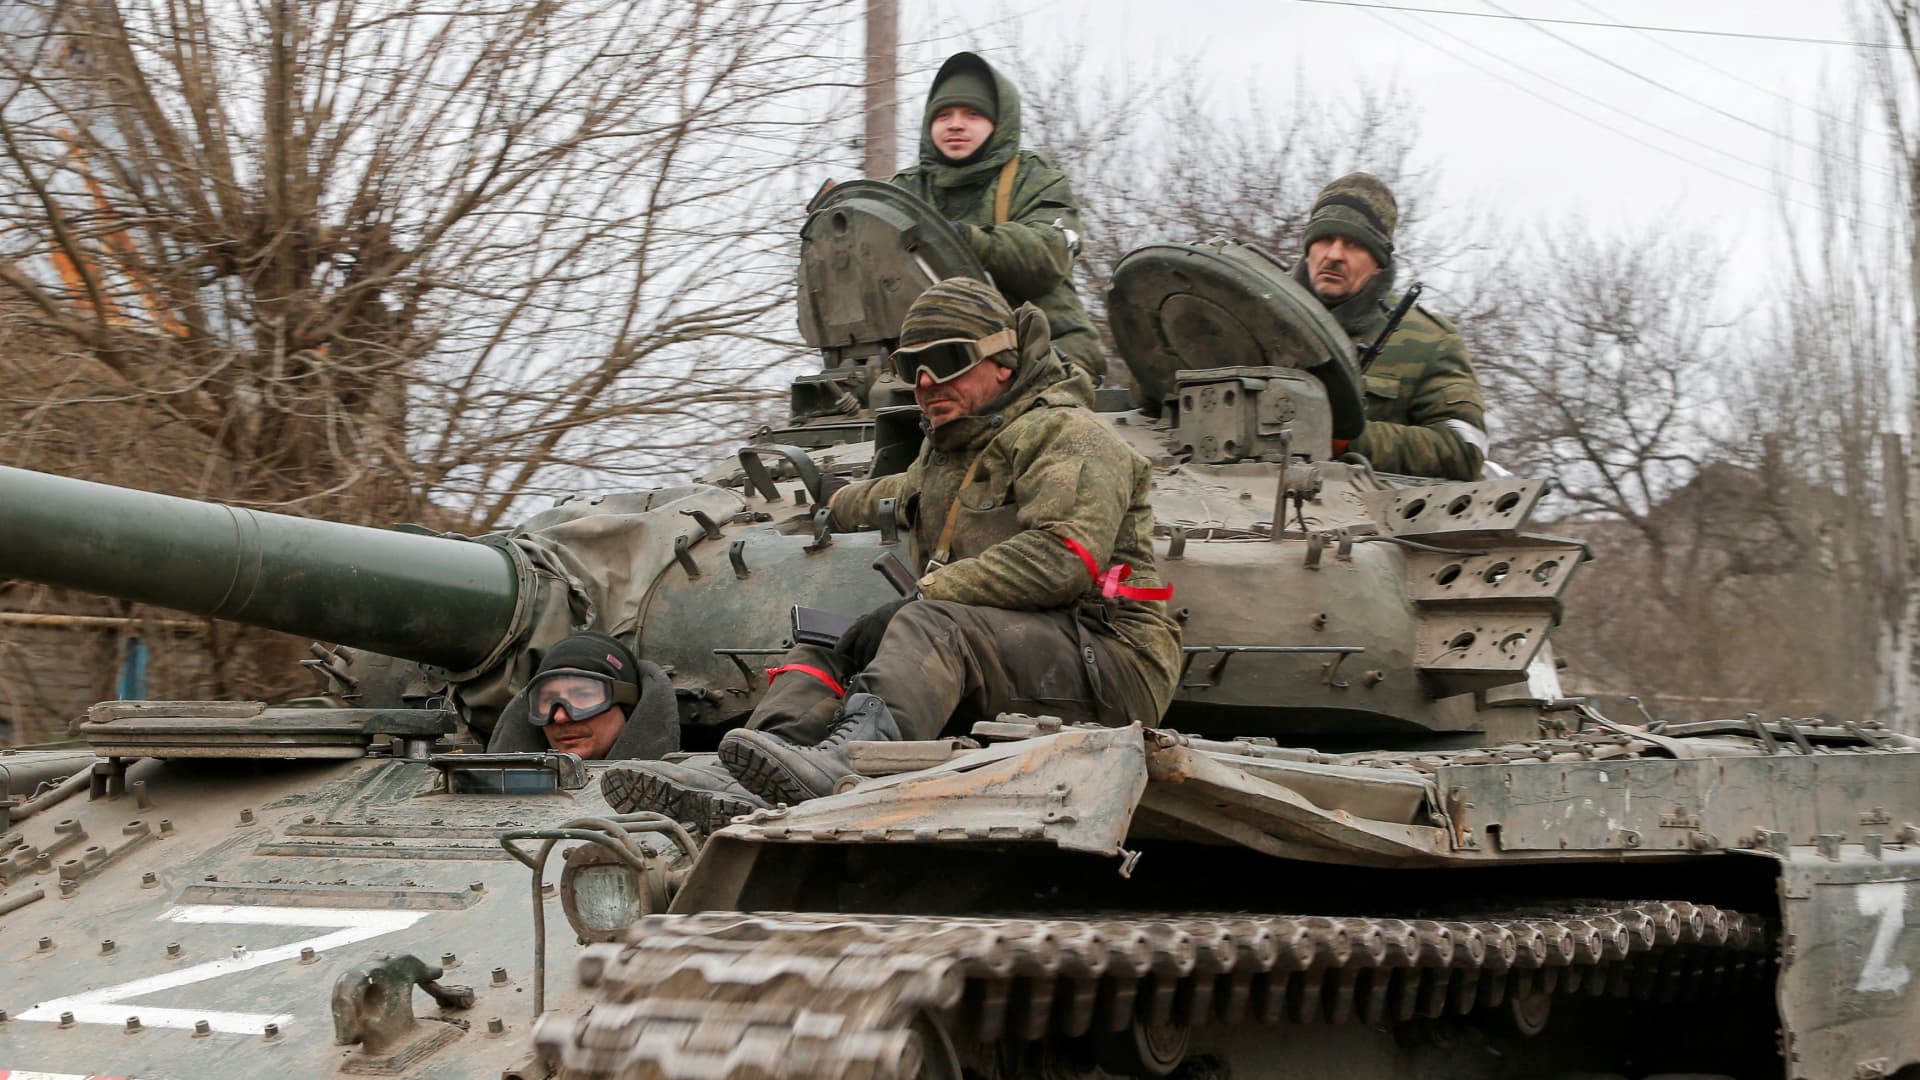 Service members of pro-Russian troops in uniforms without insignia are seen in a truck in the separatist-controlled settlement of Rybinskoye during Ukraine-Russia conflict in the Donetsk region, Ukraine March 5, 2022. 